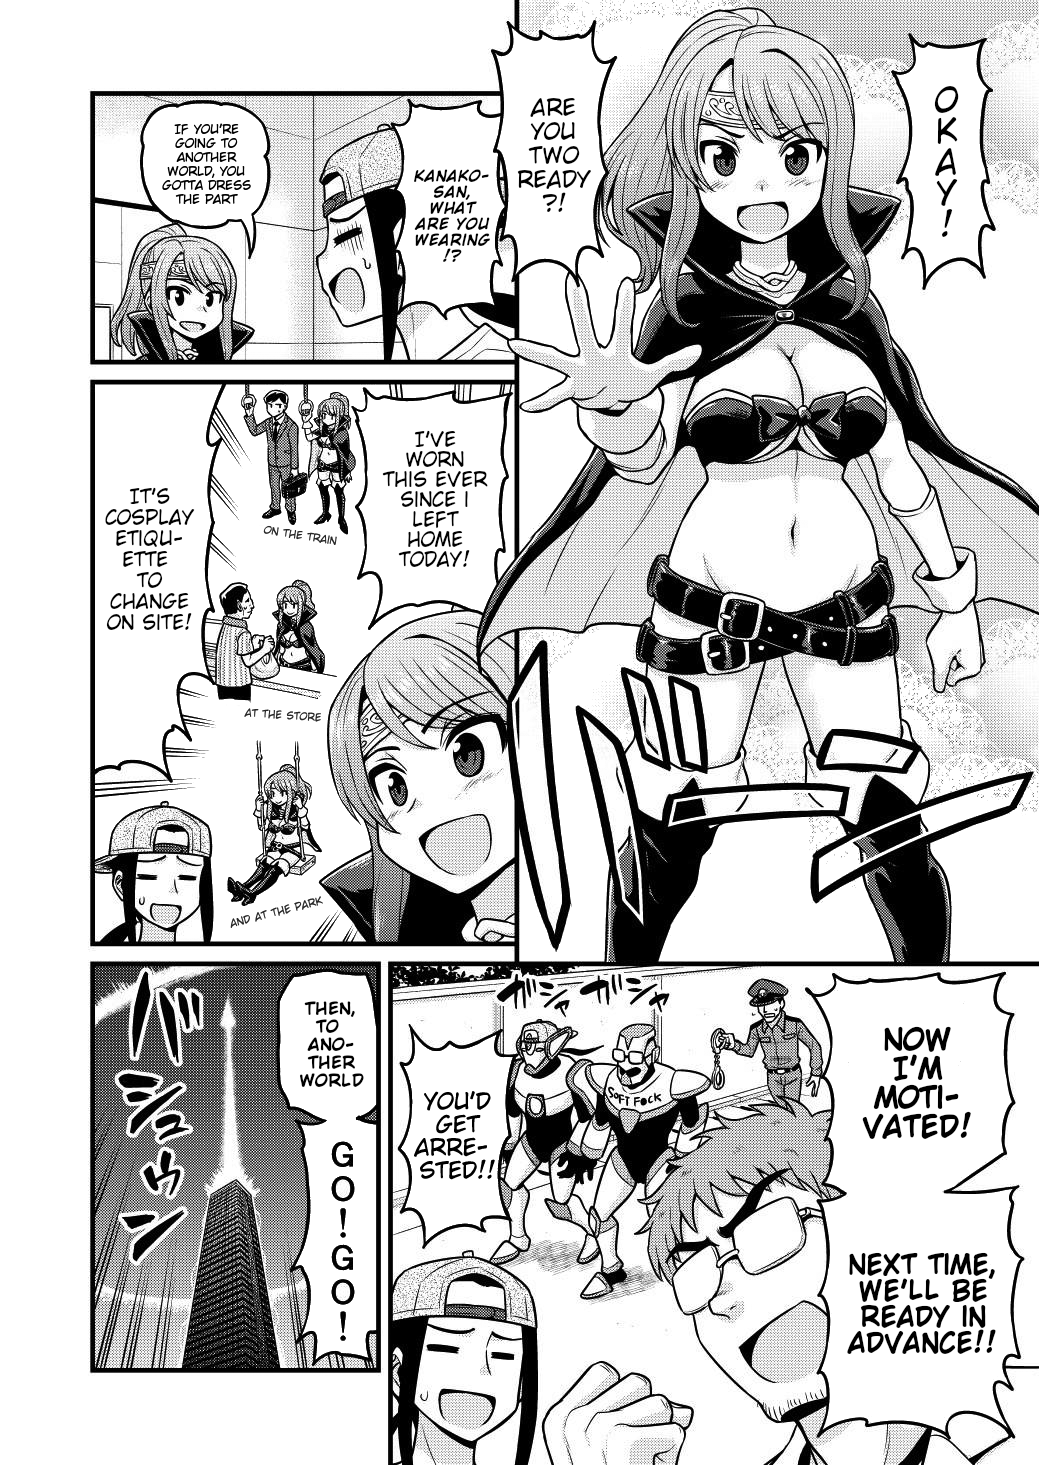 Filming Adult Videos in Another World - Chapter 3 Page 3